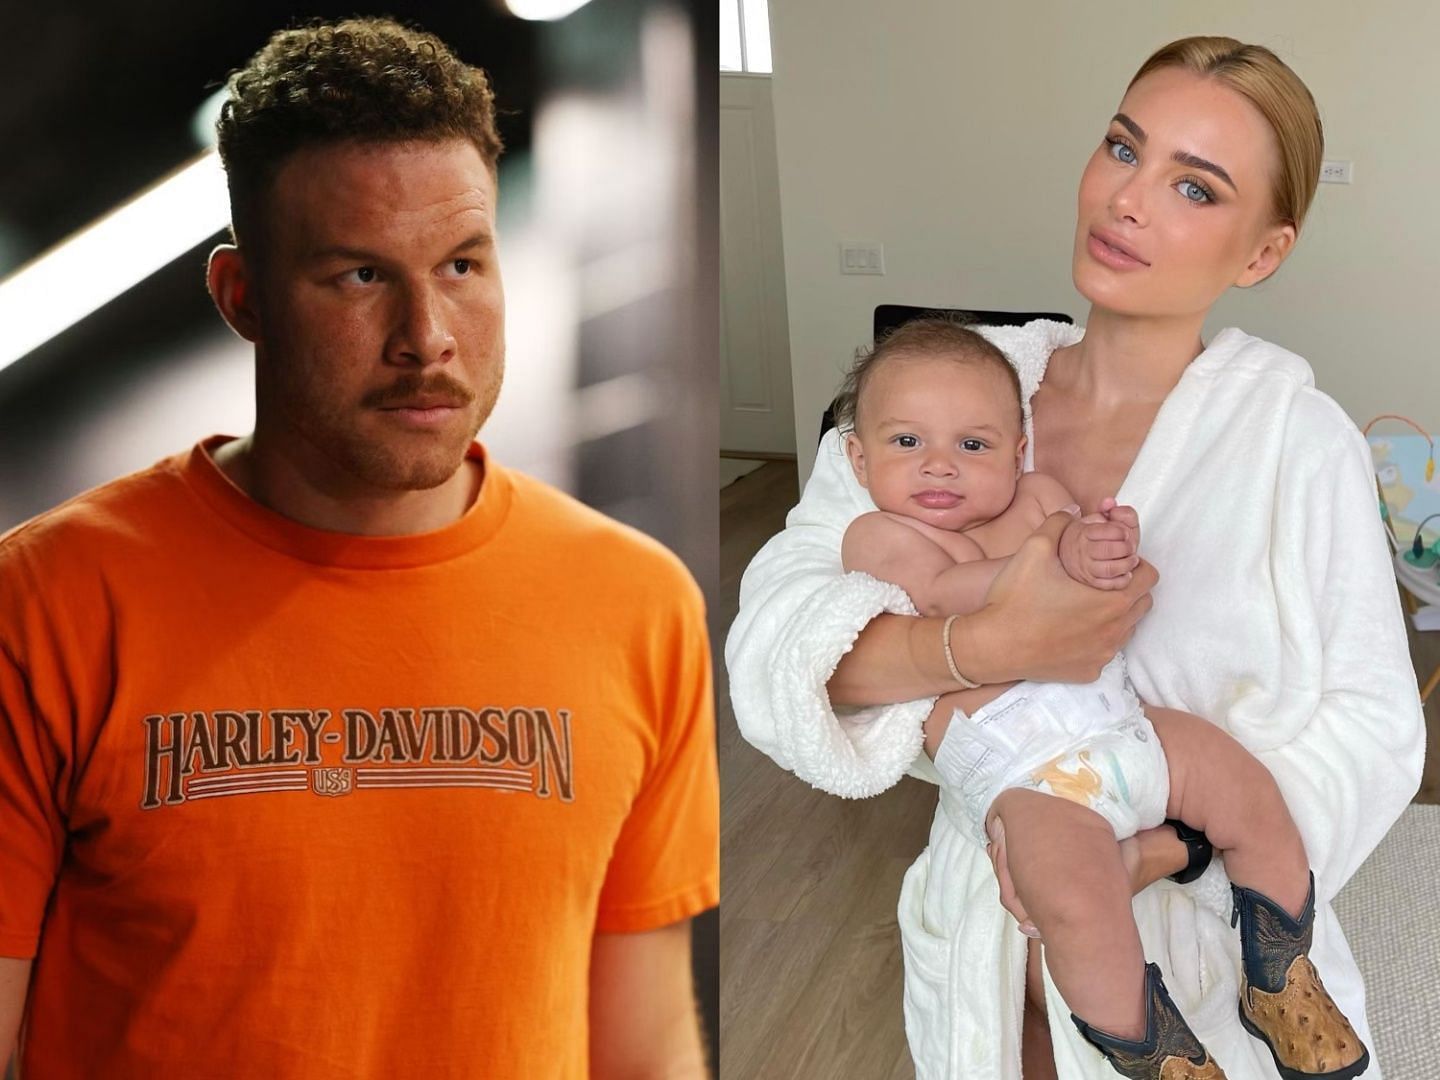 Blake Griffin (left) and Lana Rhoades with her son Milo (right)